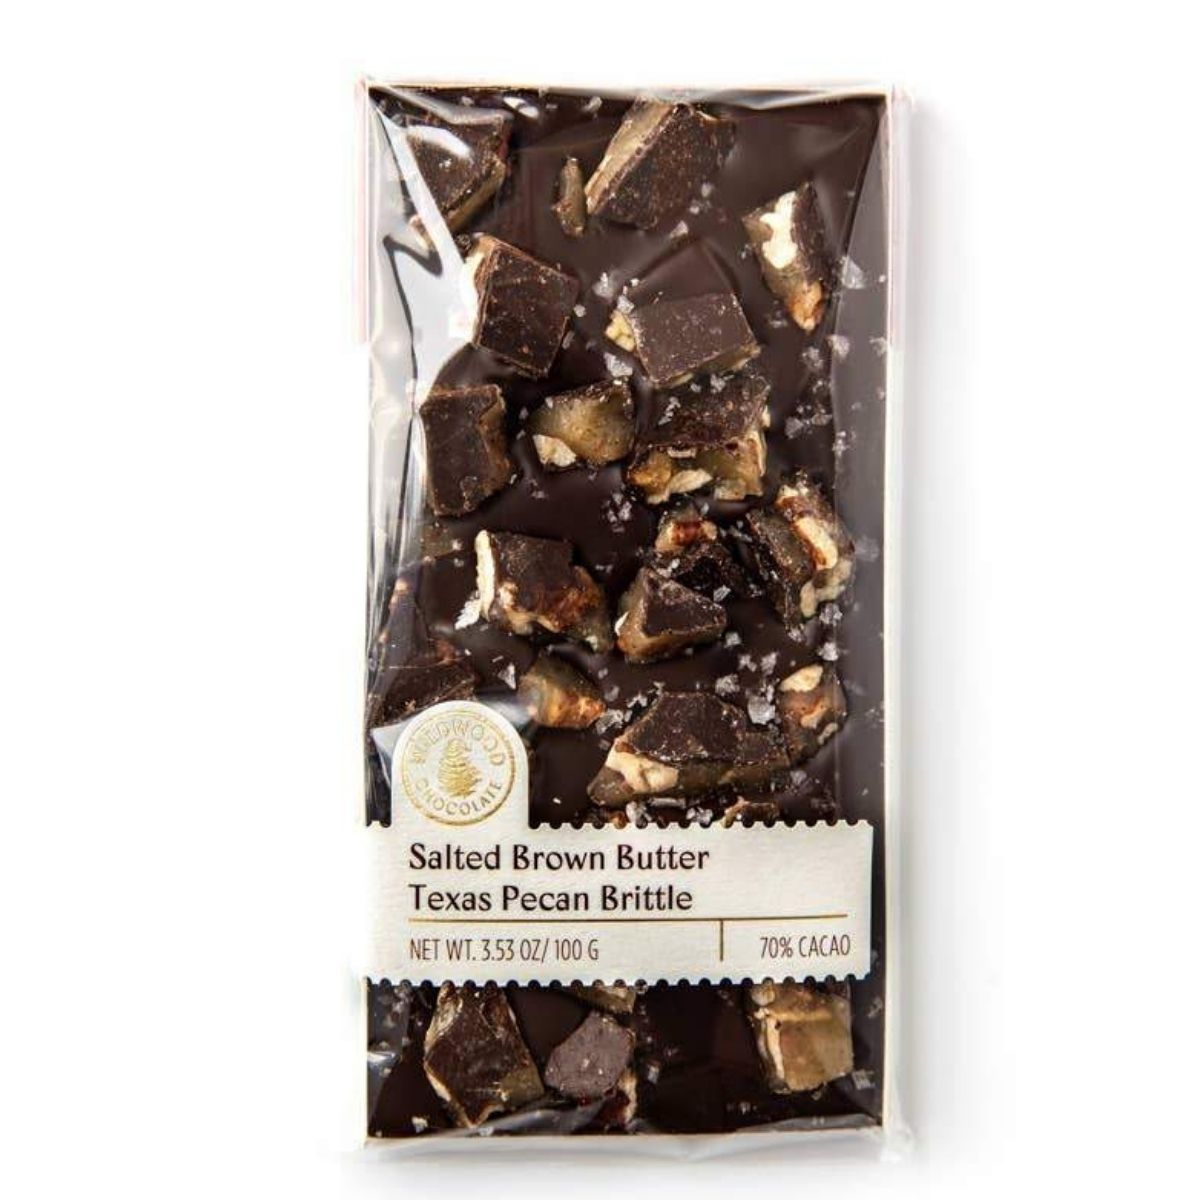 Salted Brown Butter Texas Pecan Brittle Chocolate Bar- Handcrafted